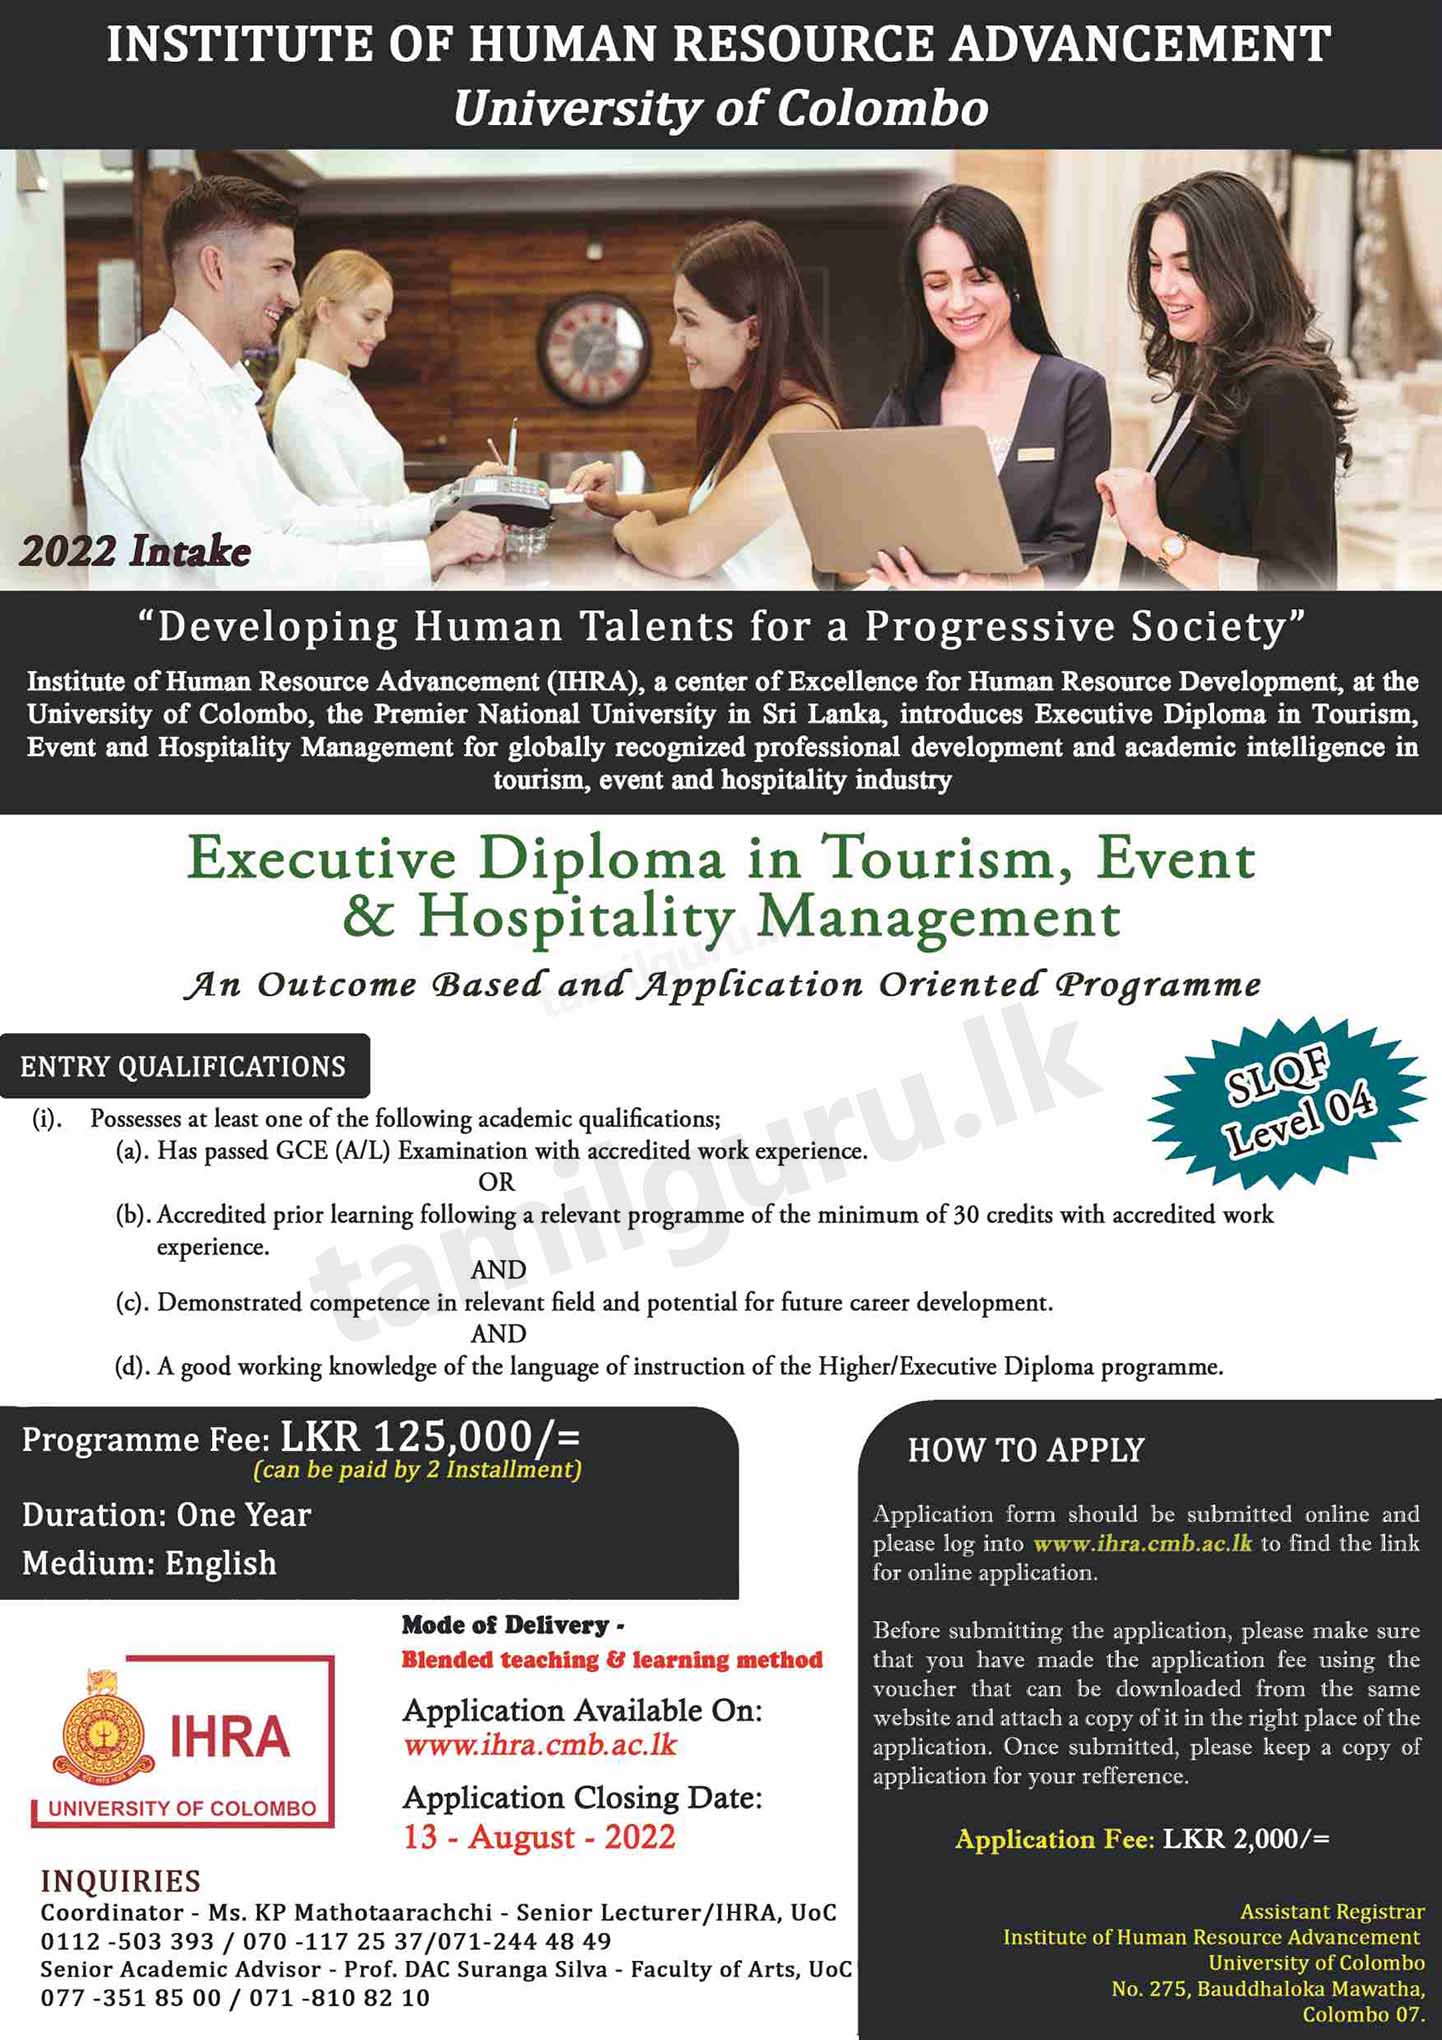 Executive Diploma in Tourism, Events and Hospitality Management (EDTEHM) Intake 2022 - University of Colombo (IHRA)